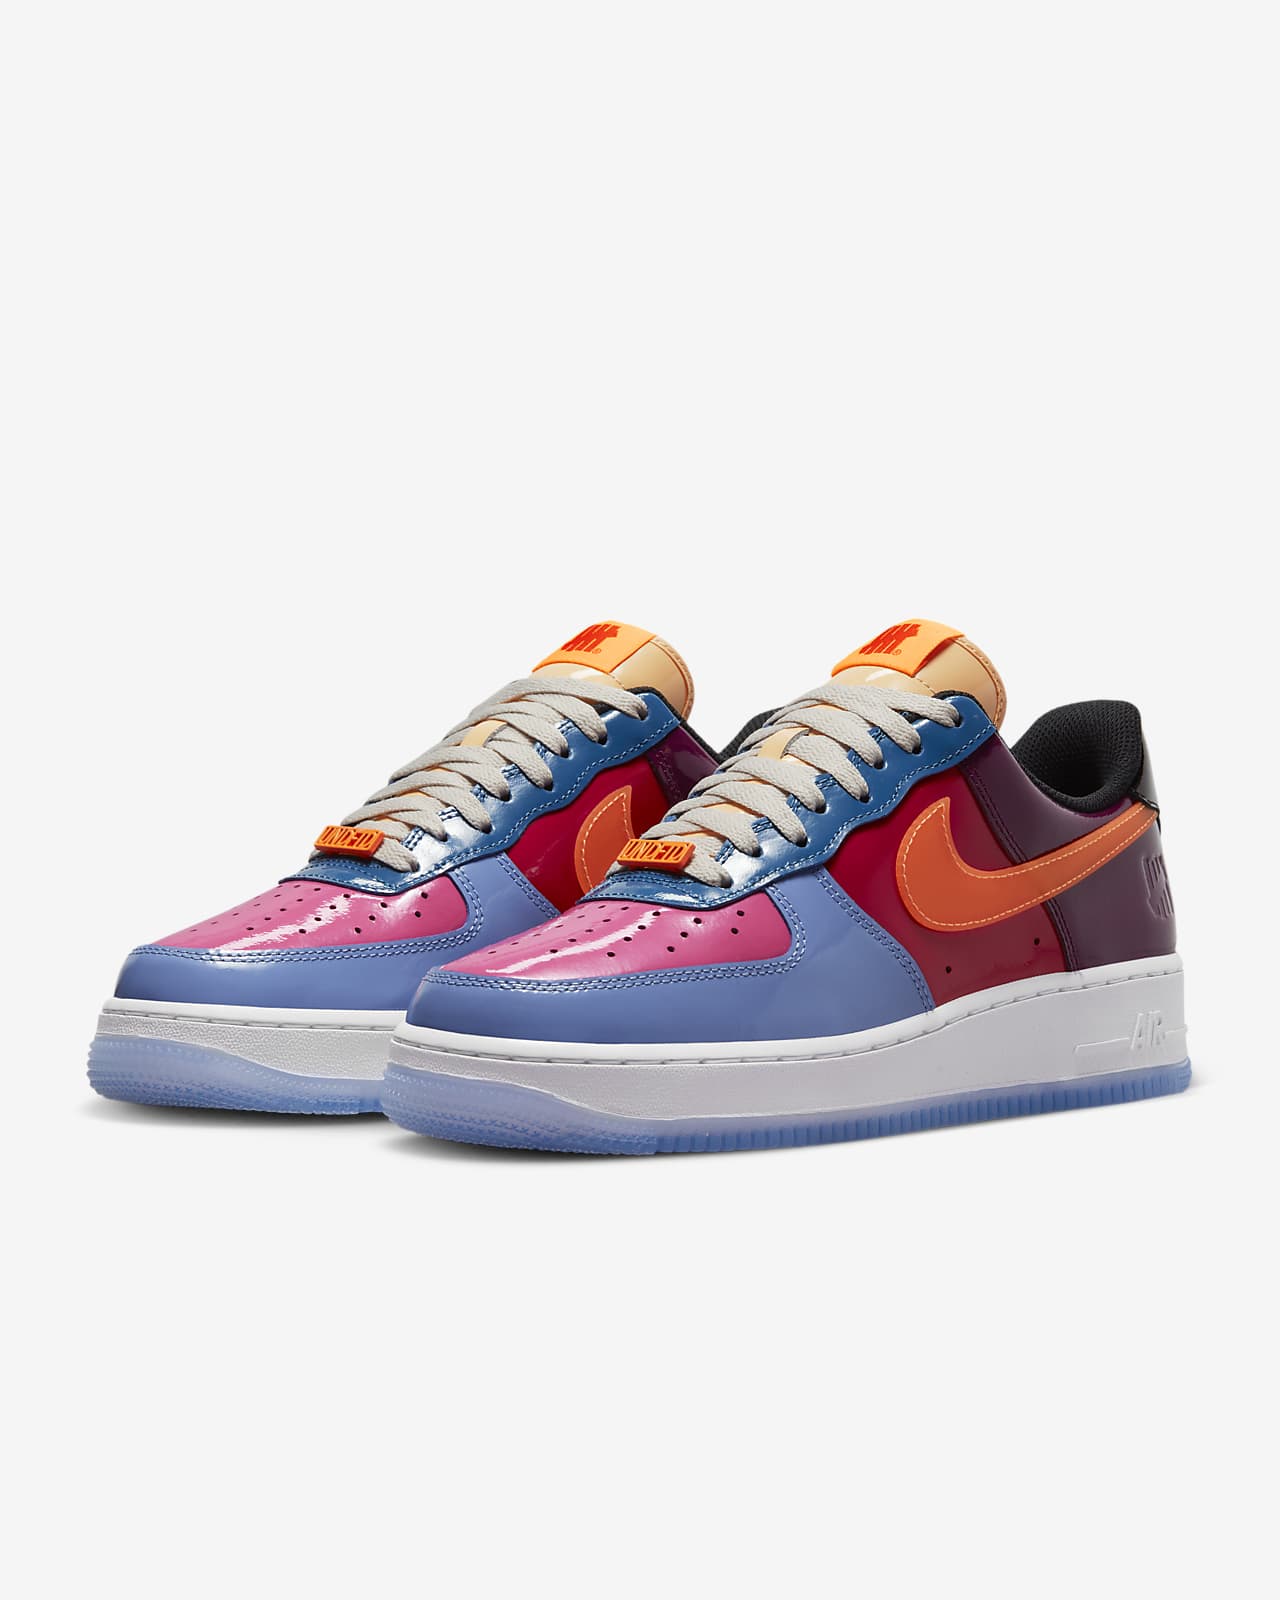 Oso polar discreción Quagga Nike Air Force 1 Low x UNDEFEATED Men's Shoes. Nike IN